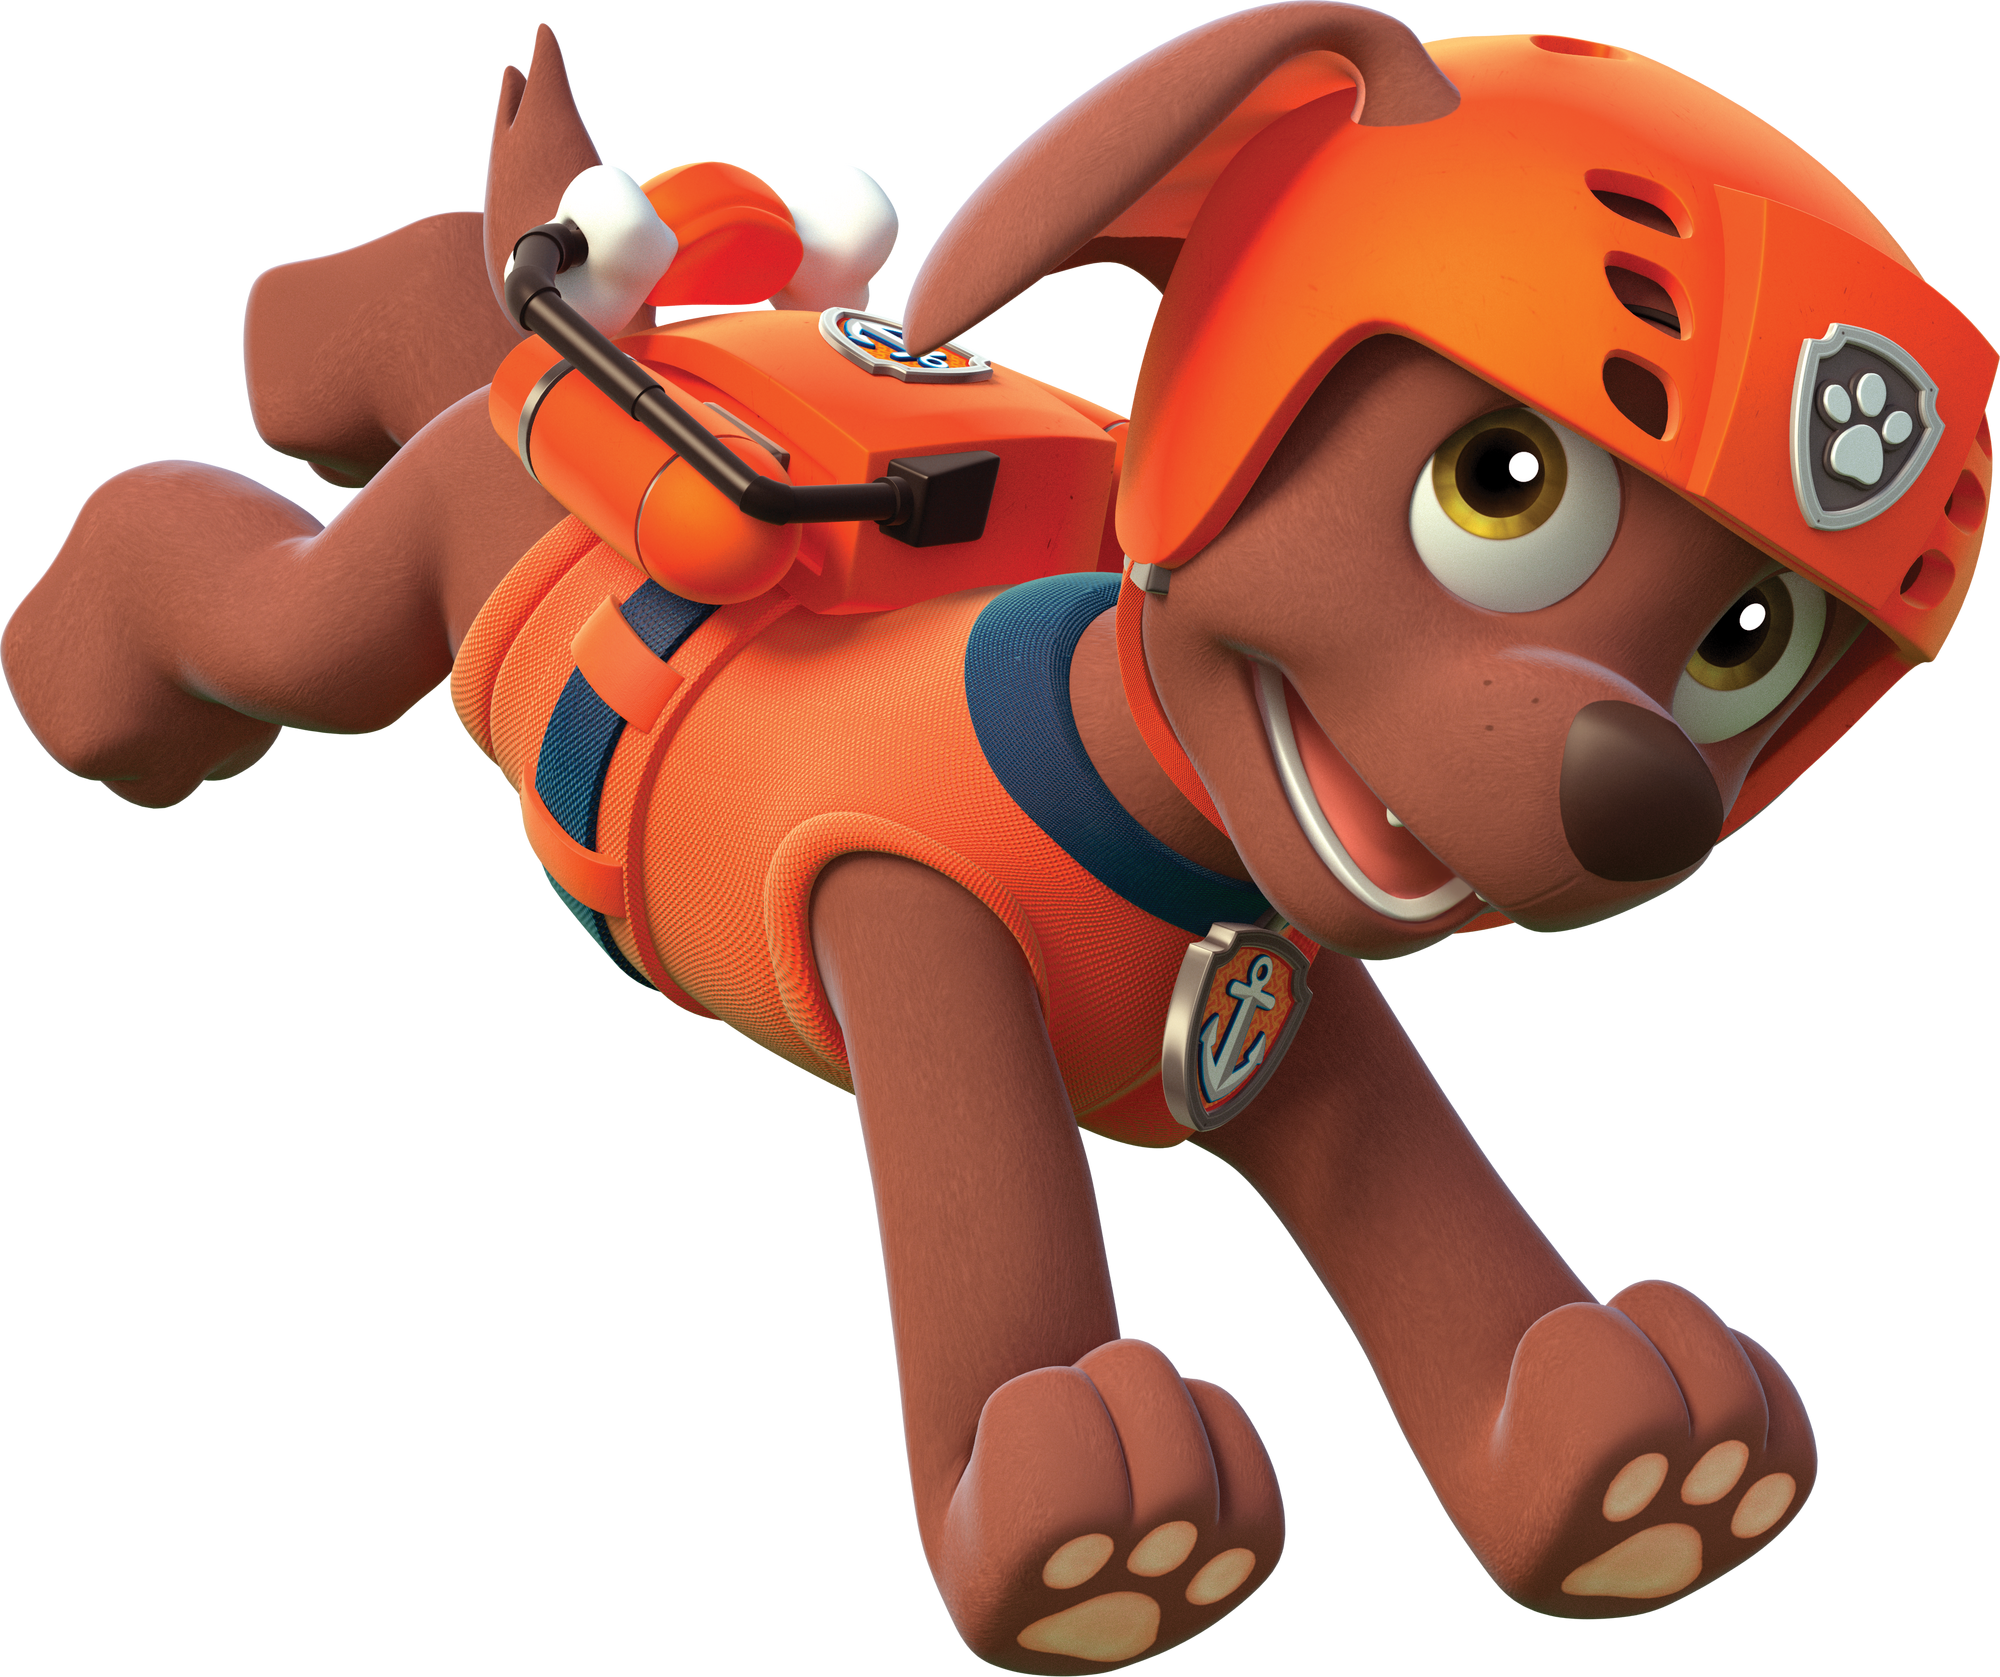 Paw Patrol Paw Patrol Characters Zuma Paw Patrol | Images and Photos finder